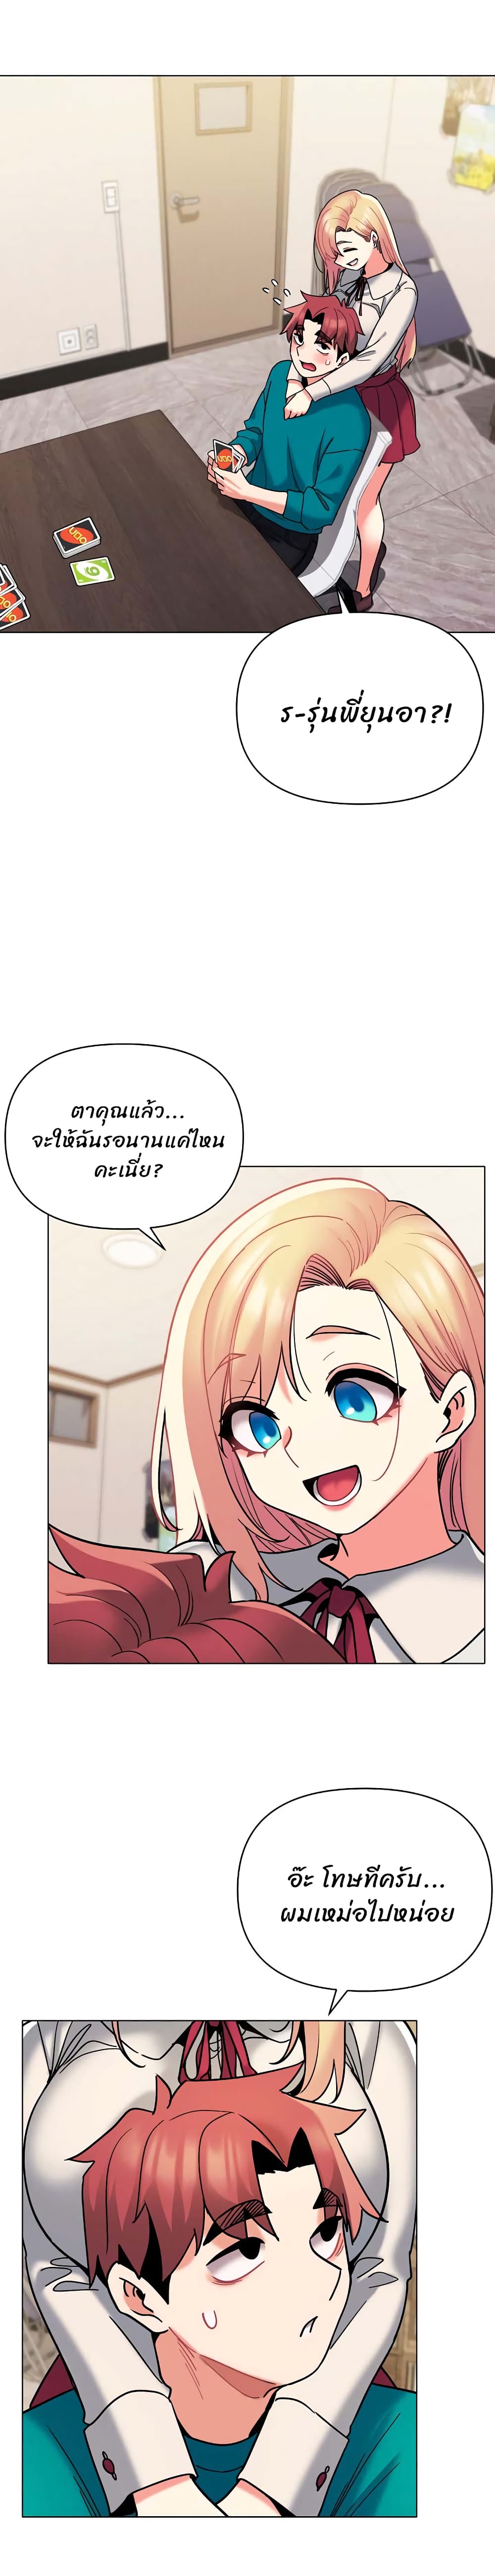 College Life Starts With Clubs 49 ภาพที่ 15